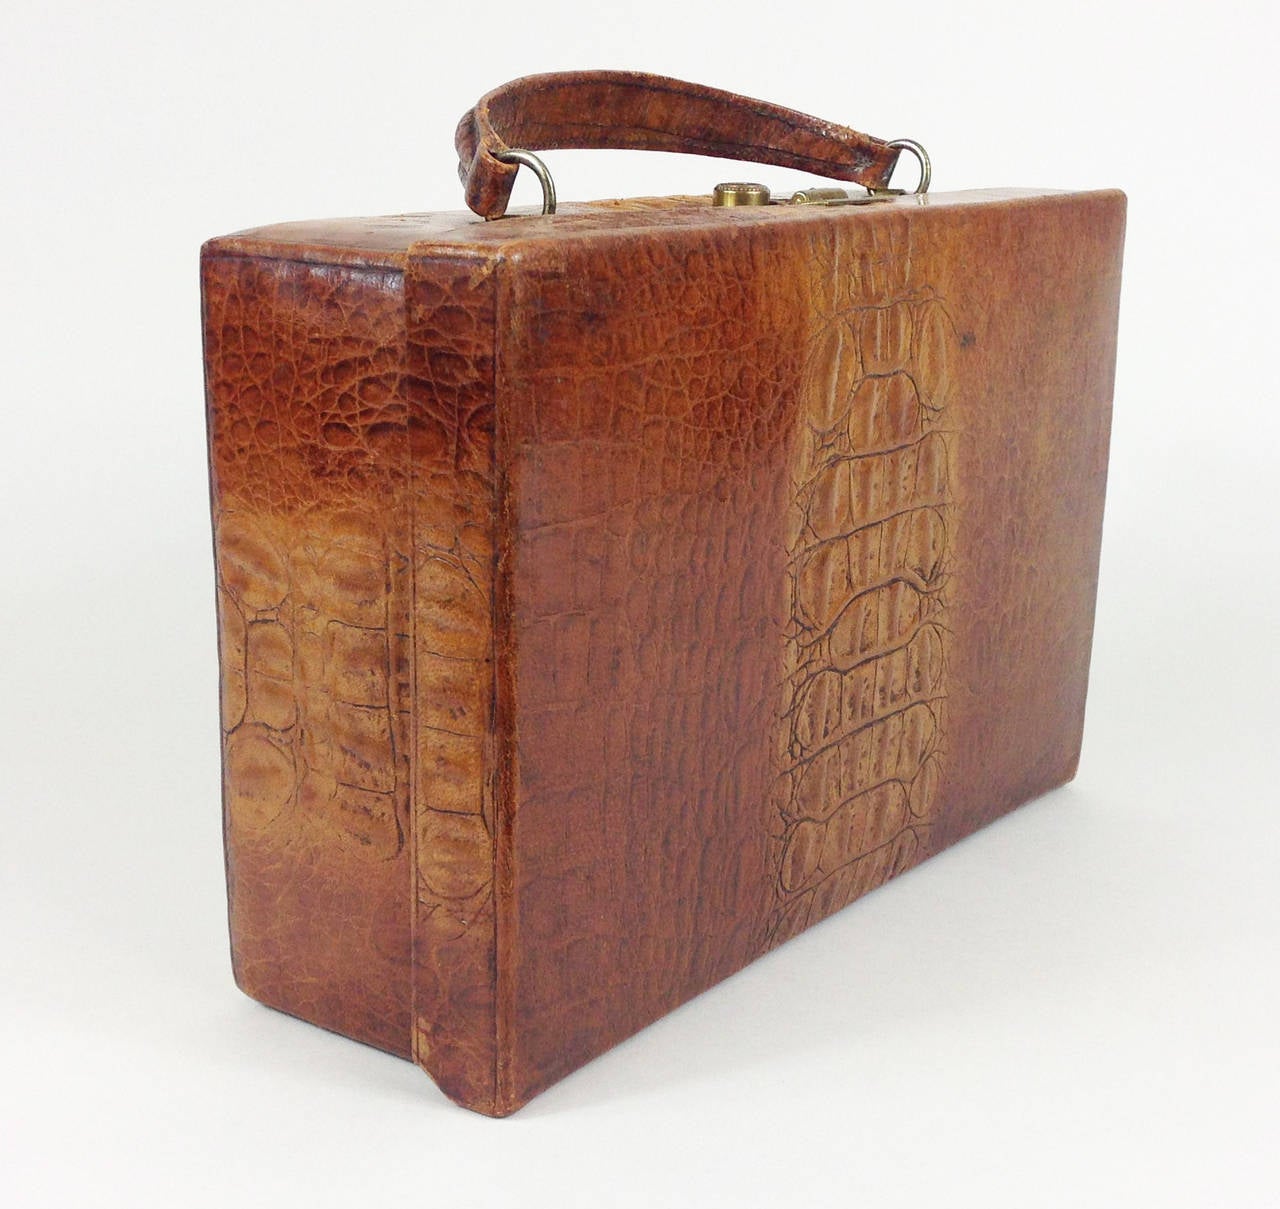 A wonderful simulated crocodile skin leather case of extremely small proportions.

The leather is in beautiful condition, whilst the edges, seams and handle are strong and on the whole damage and wear free. The brass lock still functions well